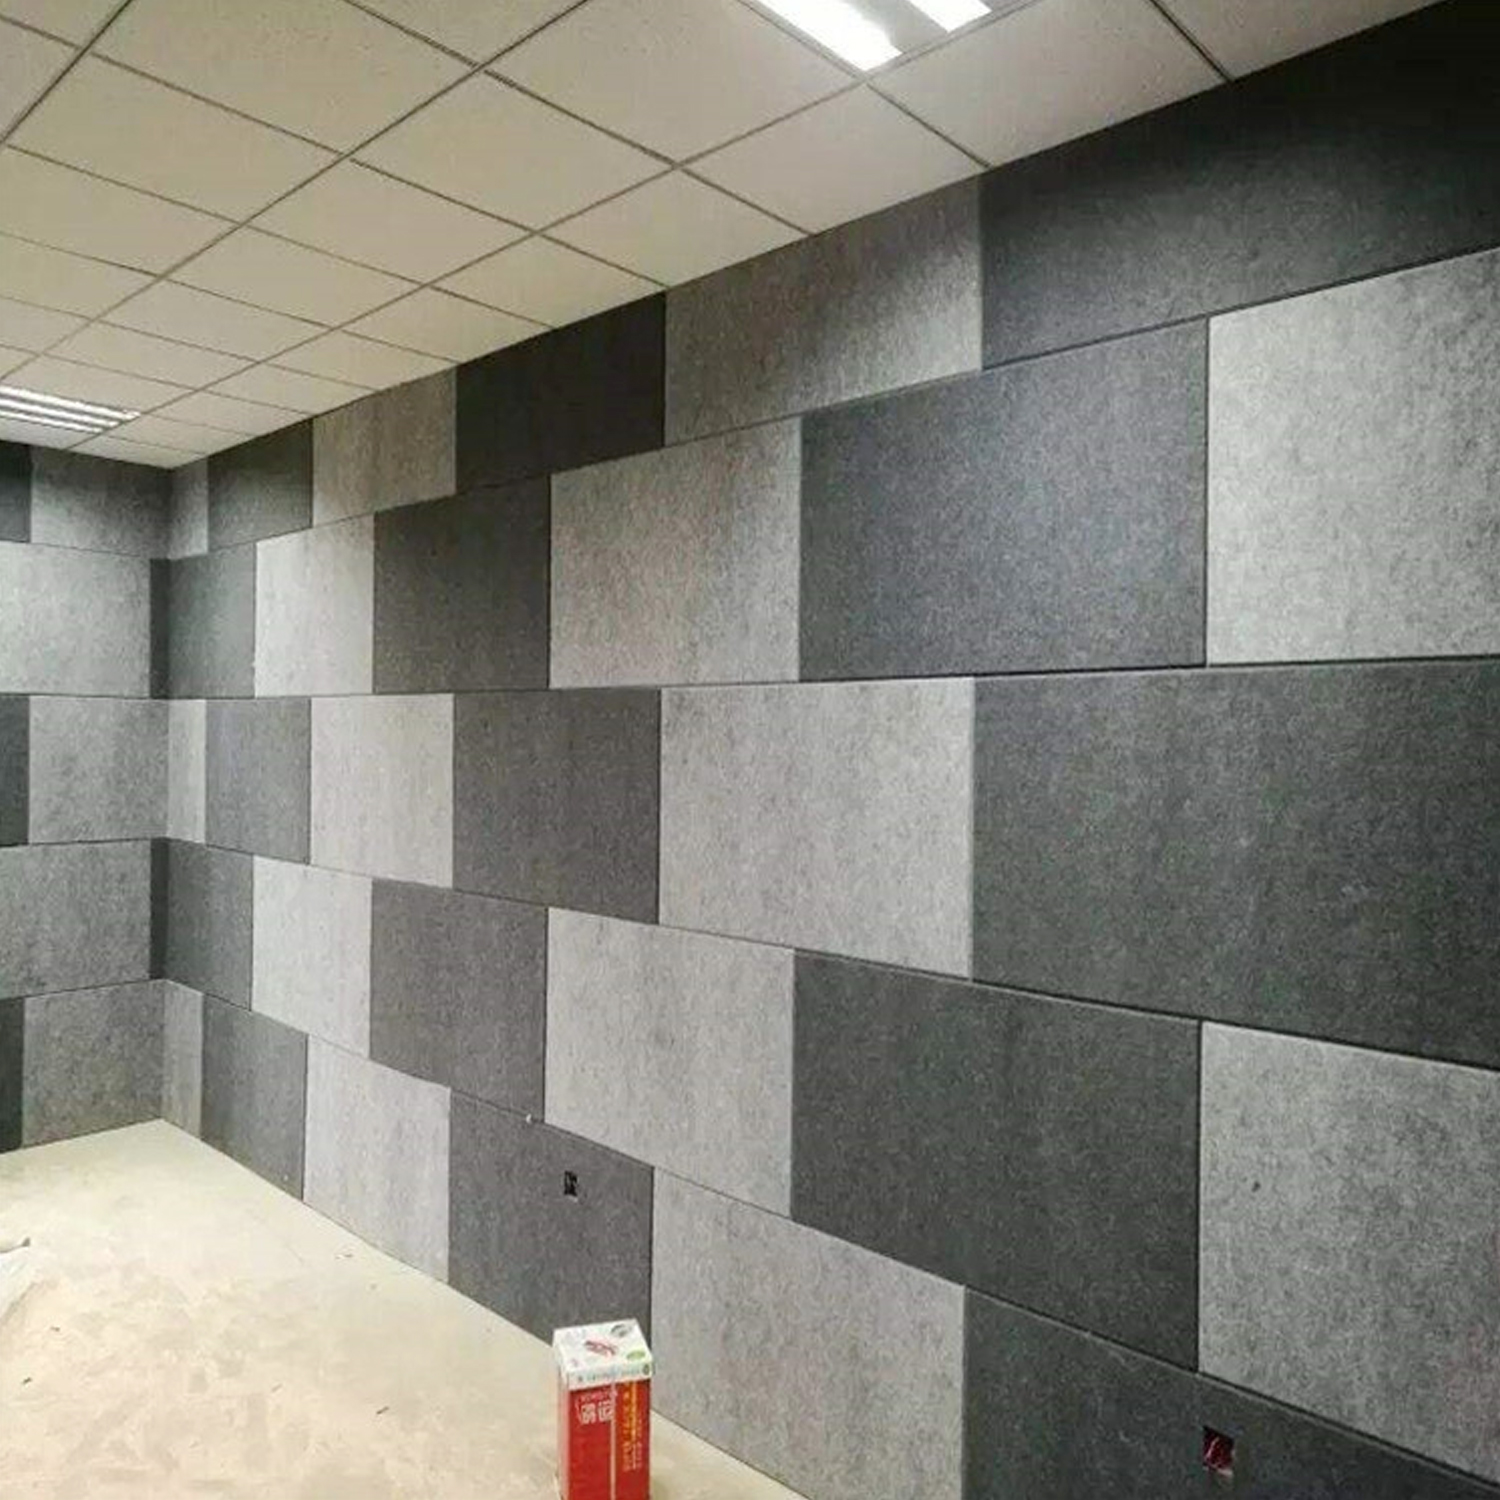 Wall Decoration Sound-Absorbing Board Sales Black Light Decoration Style Graphics Room Office Technology Color